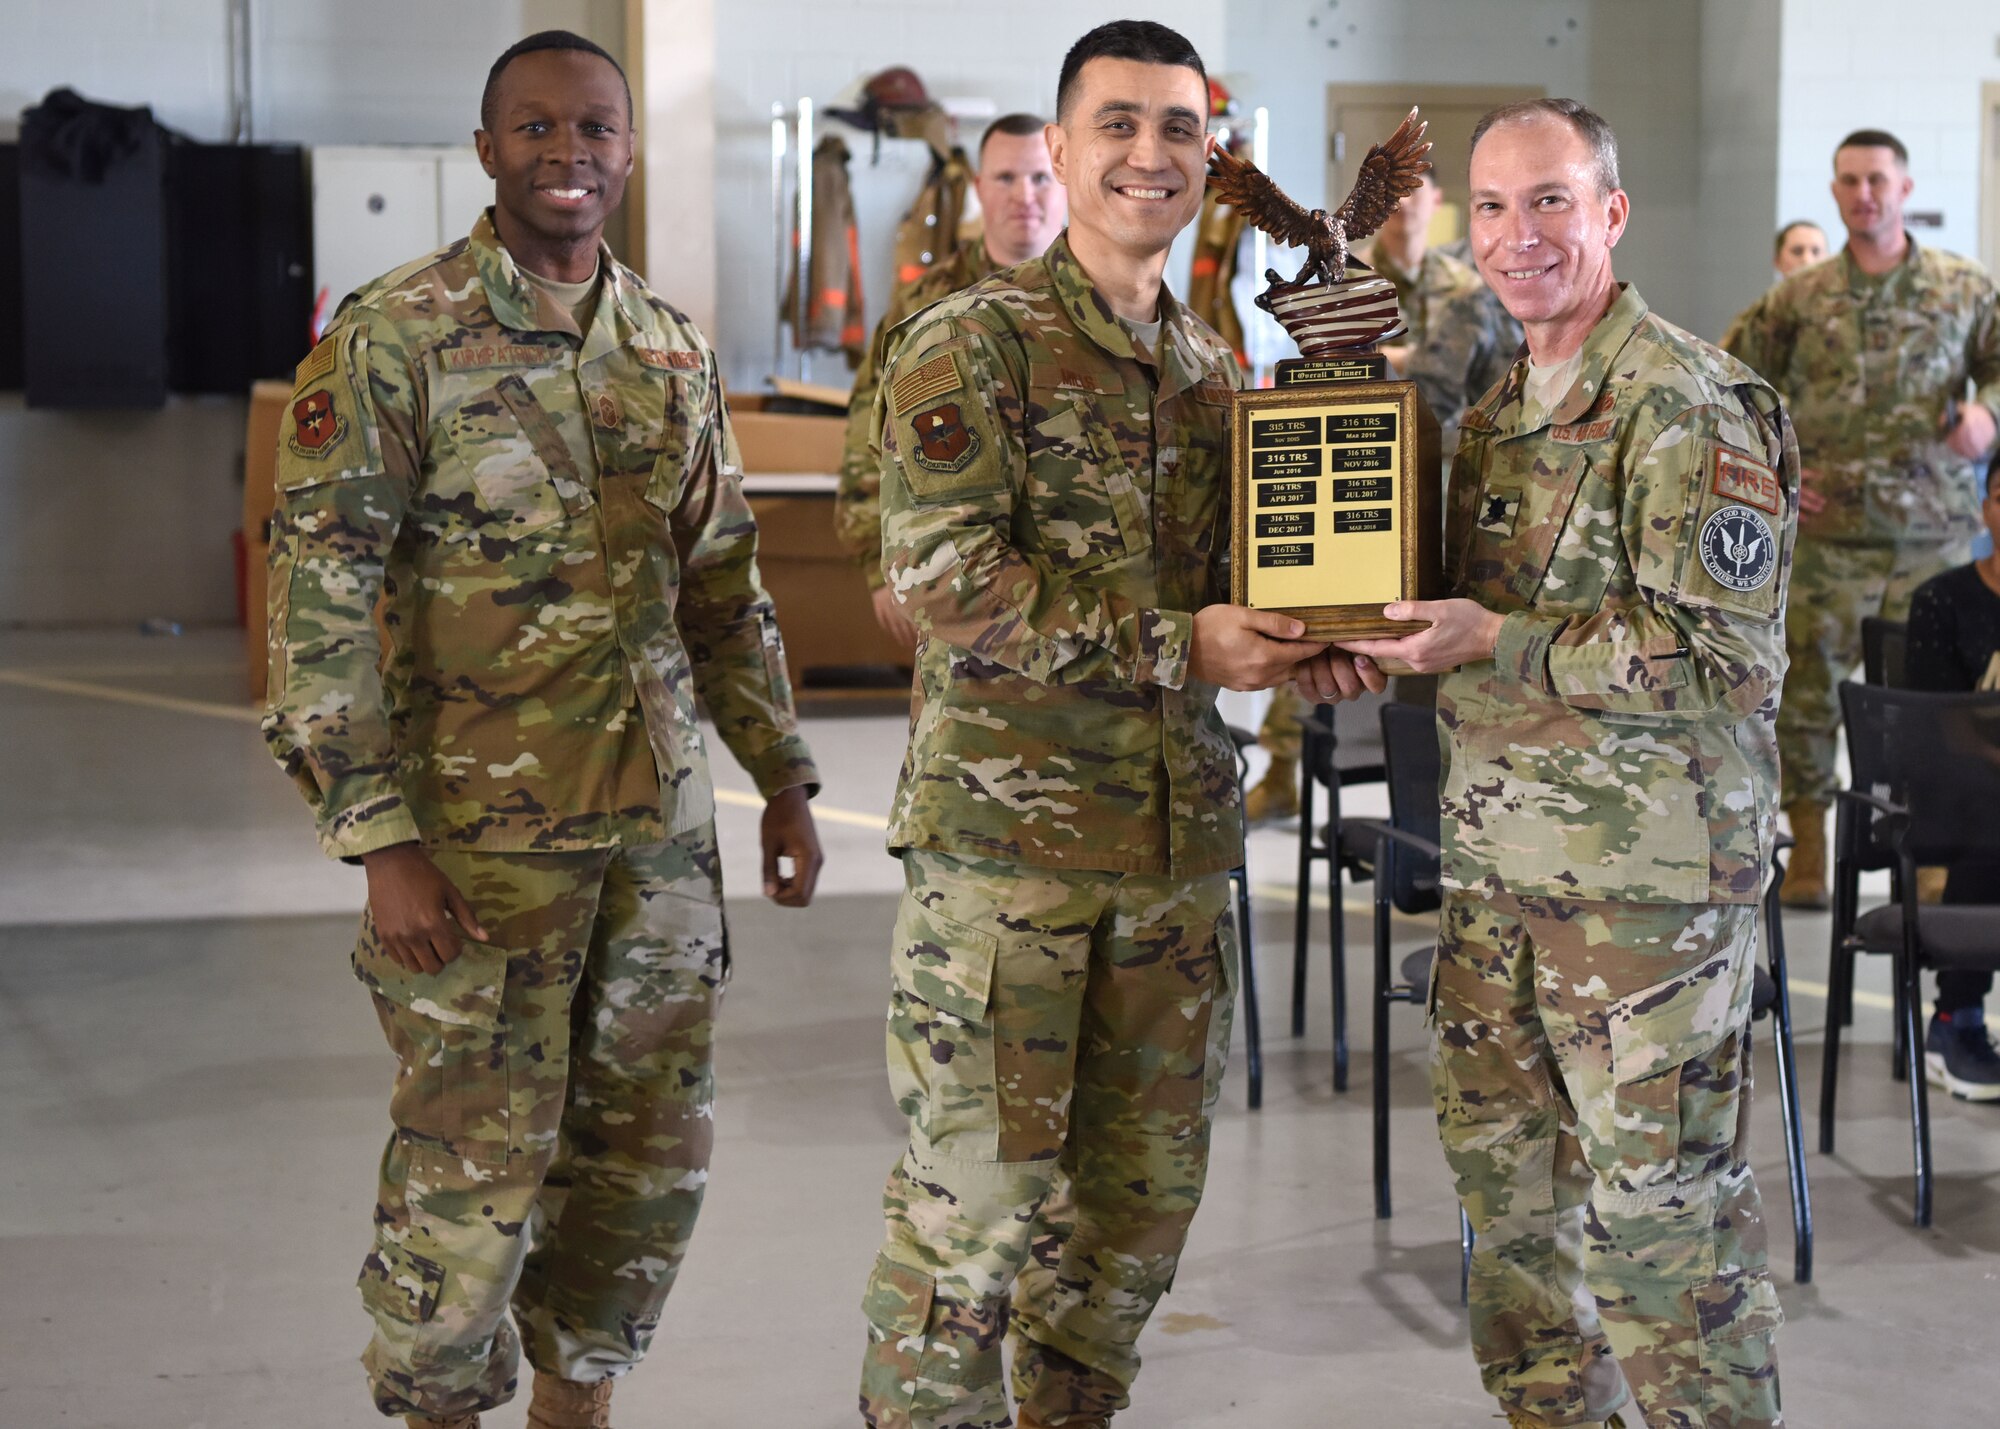 U.S. Air Force Chief Master Sgt. Lavor Kirkpatrick, 17th Training Wing command chief, and Col. Ricky Mills, 17th Training Wing commander present Lt. Col. Scott Cline, 312th Training Squadron commander, the award for the 312th TRS after winning the 17th TRG Drill Competition overall at the Louis F. Garland Department of Defense Fire Academy on Goodfellow Air Force Base, Texas, April 19, 2019. The drill competition is an opportunity for students to show off their marching prowess, discipline and unity. (U.S. Air Force photo by Airman 1st Class Ethan Sherwood/Released)